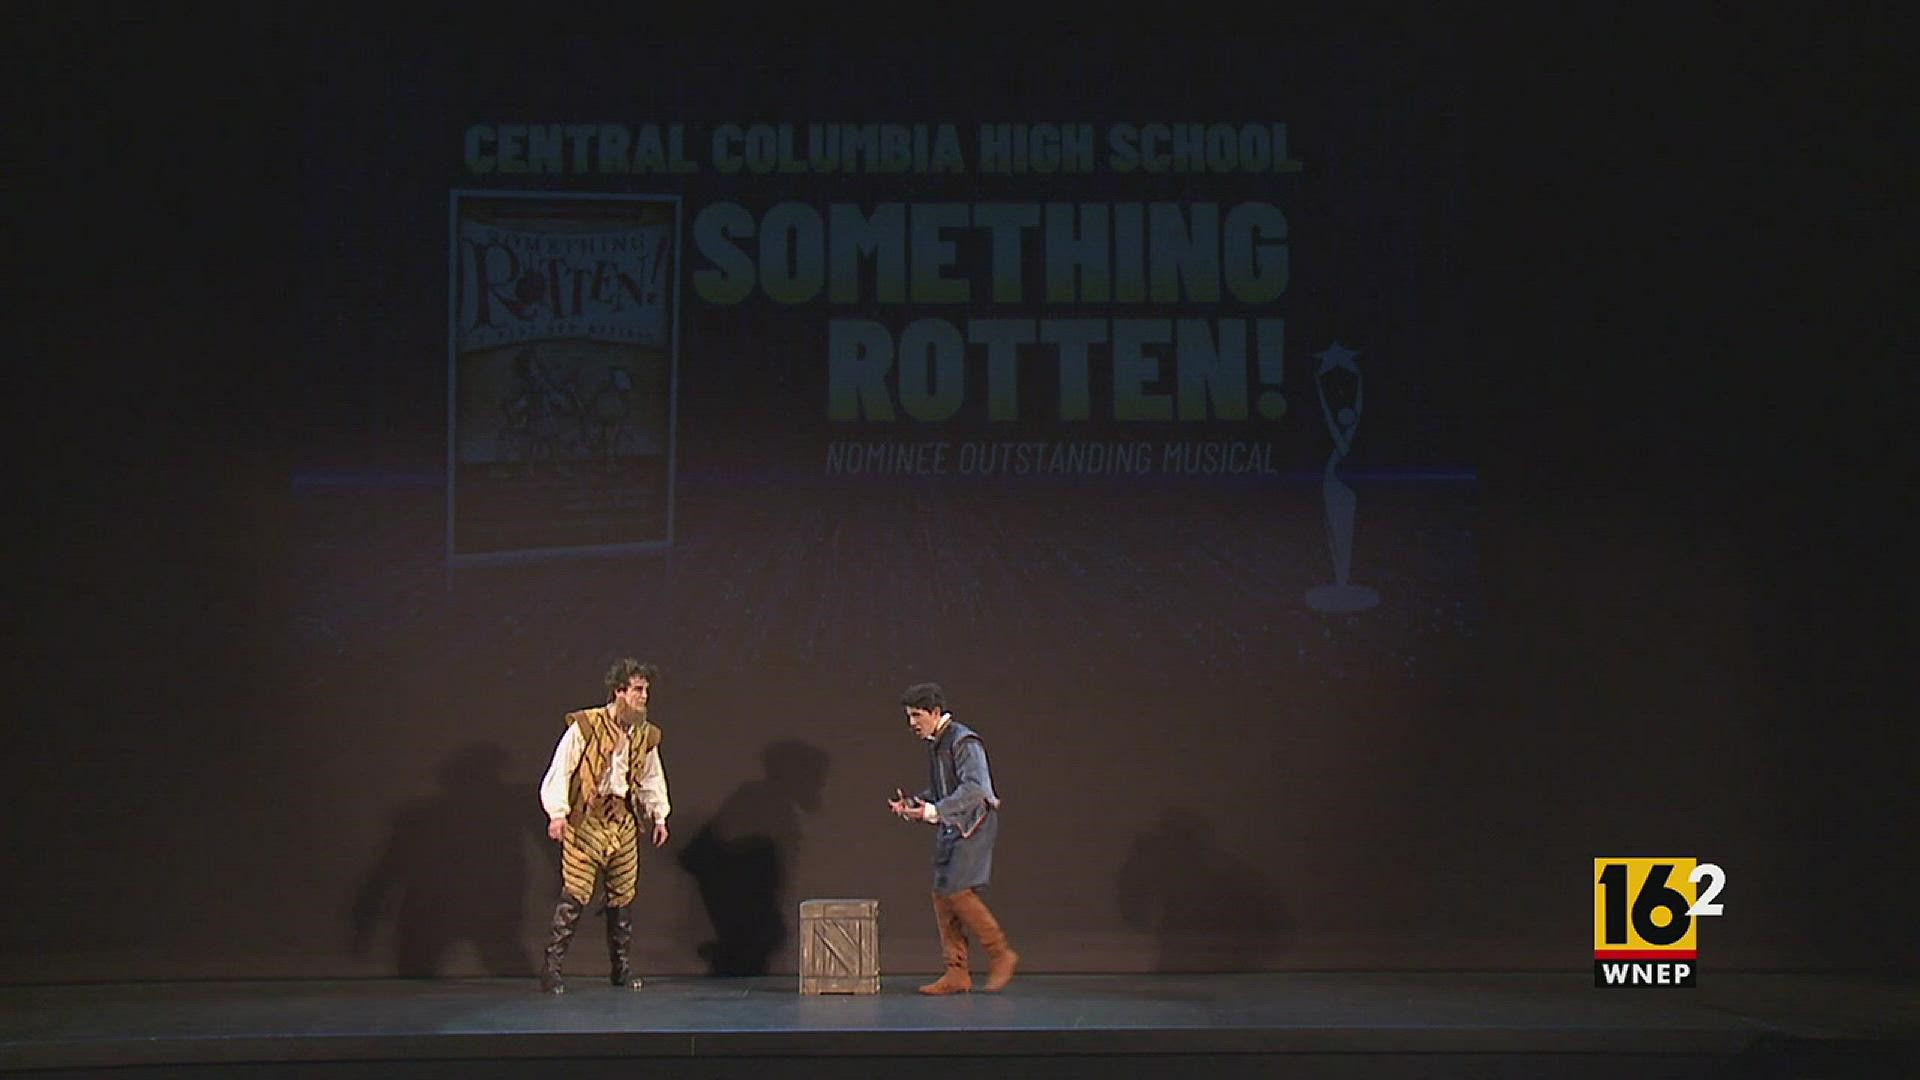 Central Columbia presents Something Rotten